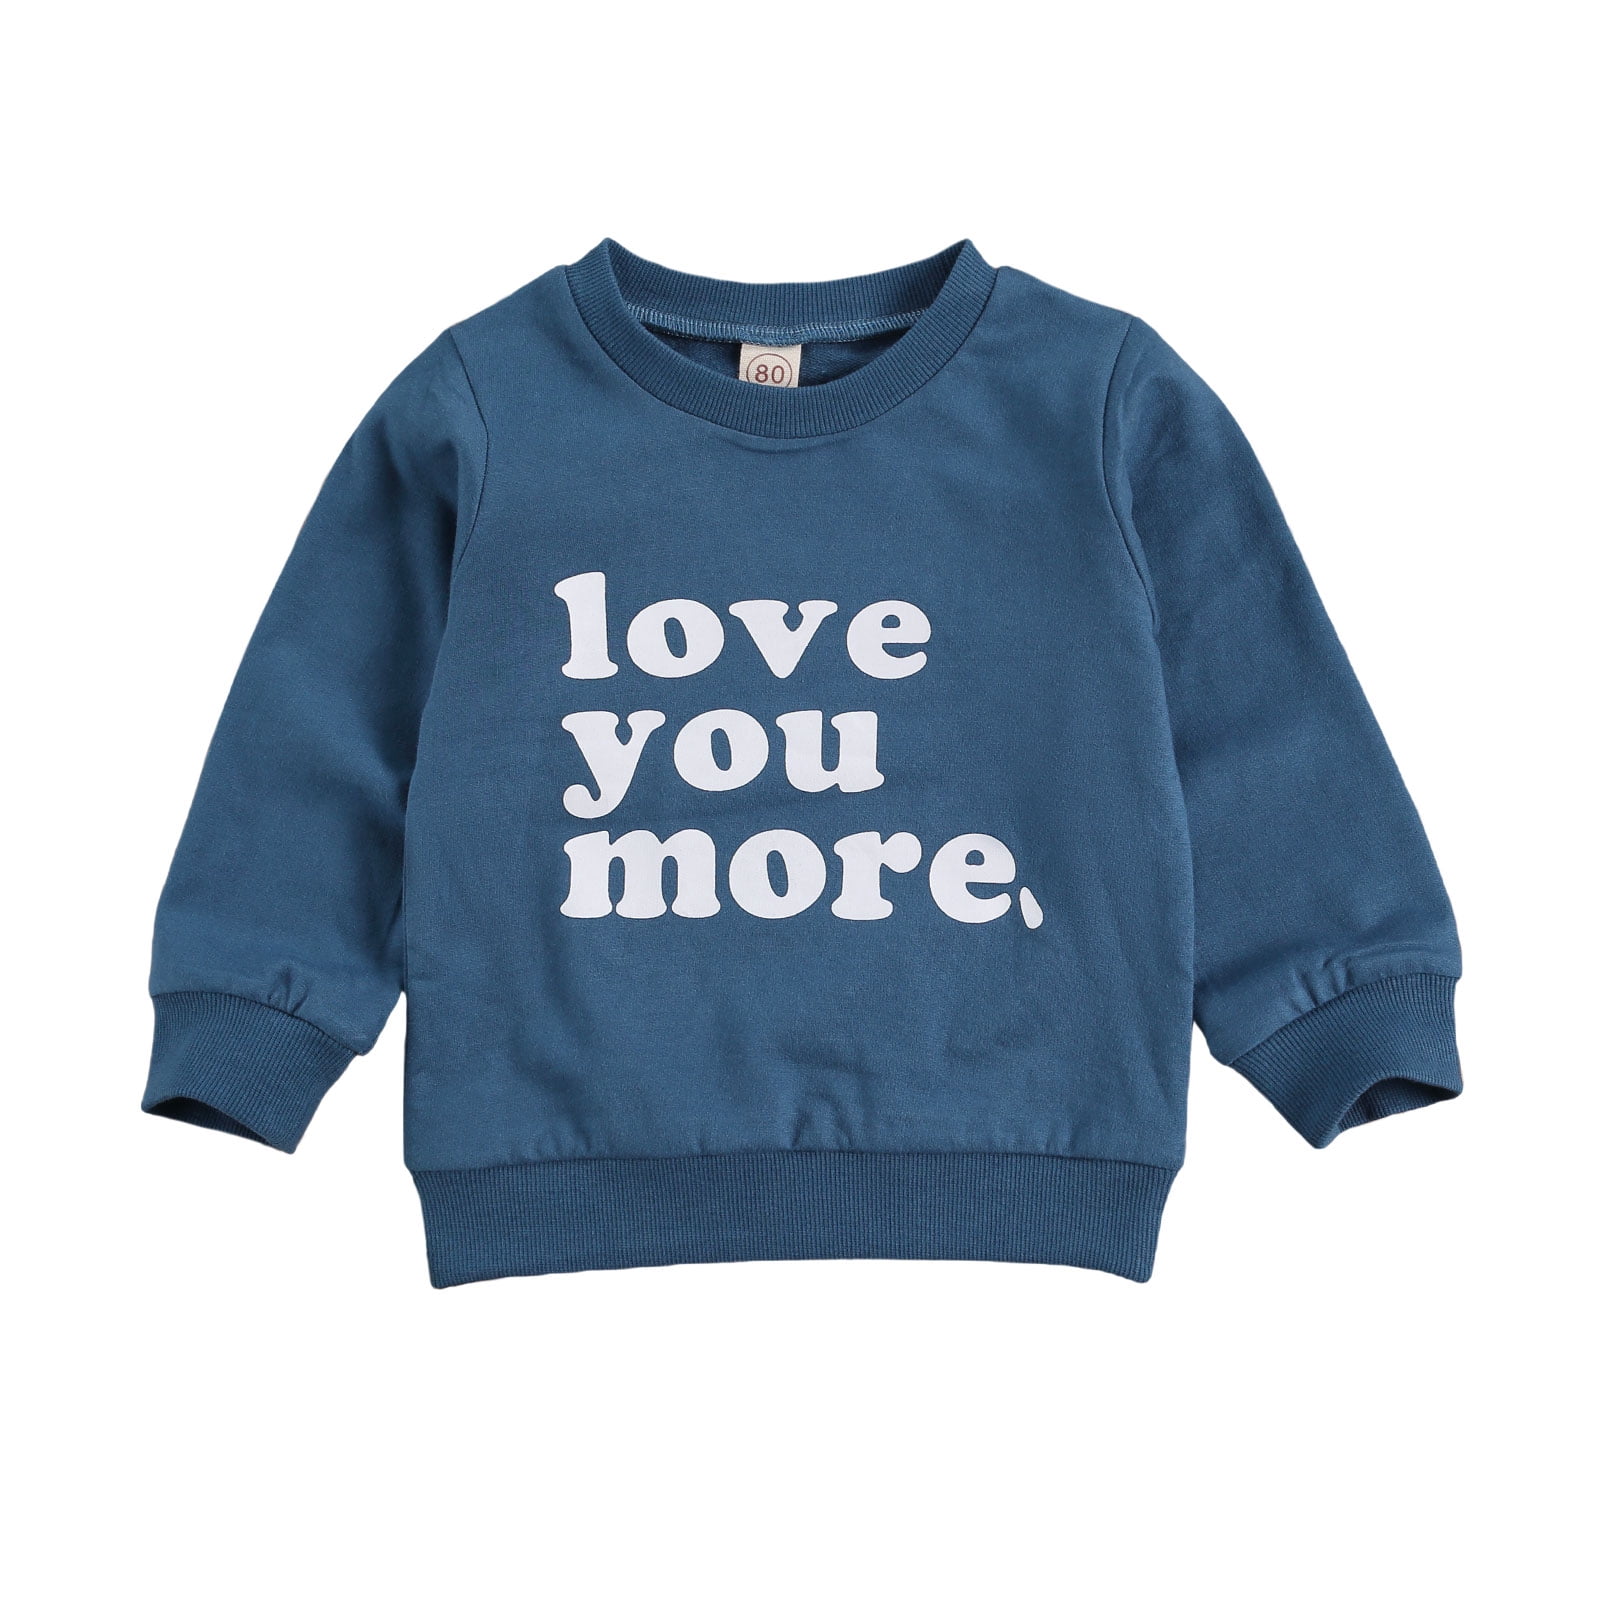 Black, 3-4 Years Toddler Baby Boy Girl Sweatshirt Long Sleeve Printed Love You More Tops Fall Winter Pullover Shirts Clothes 